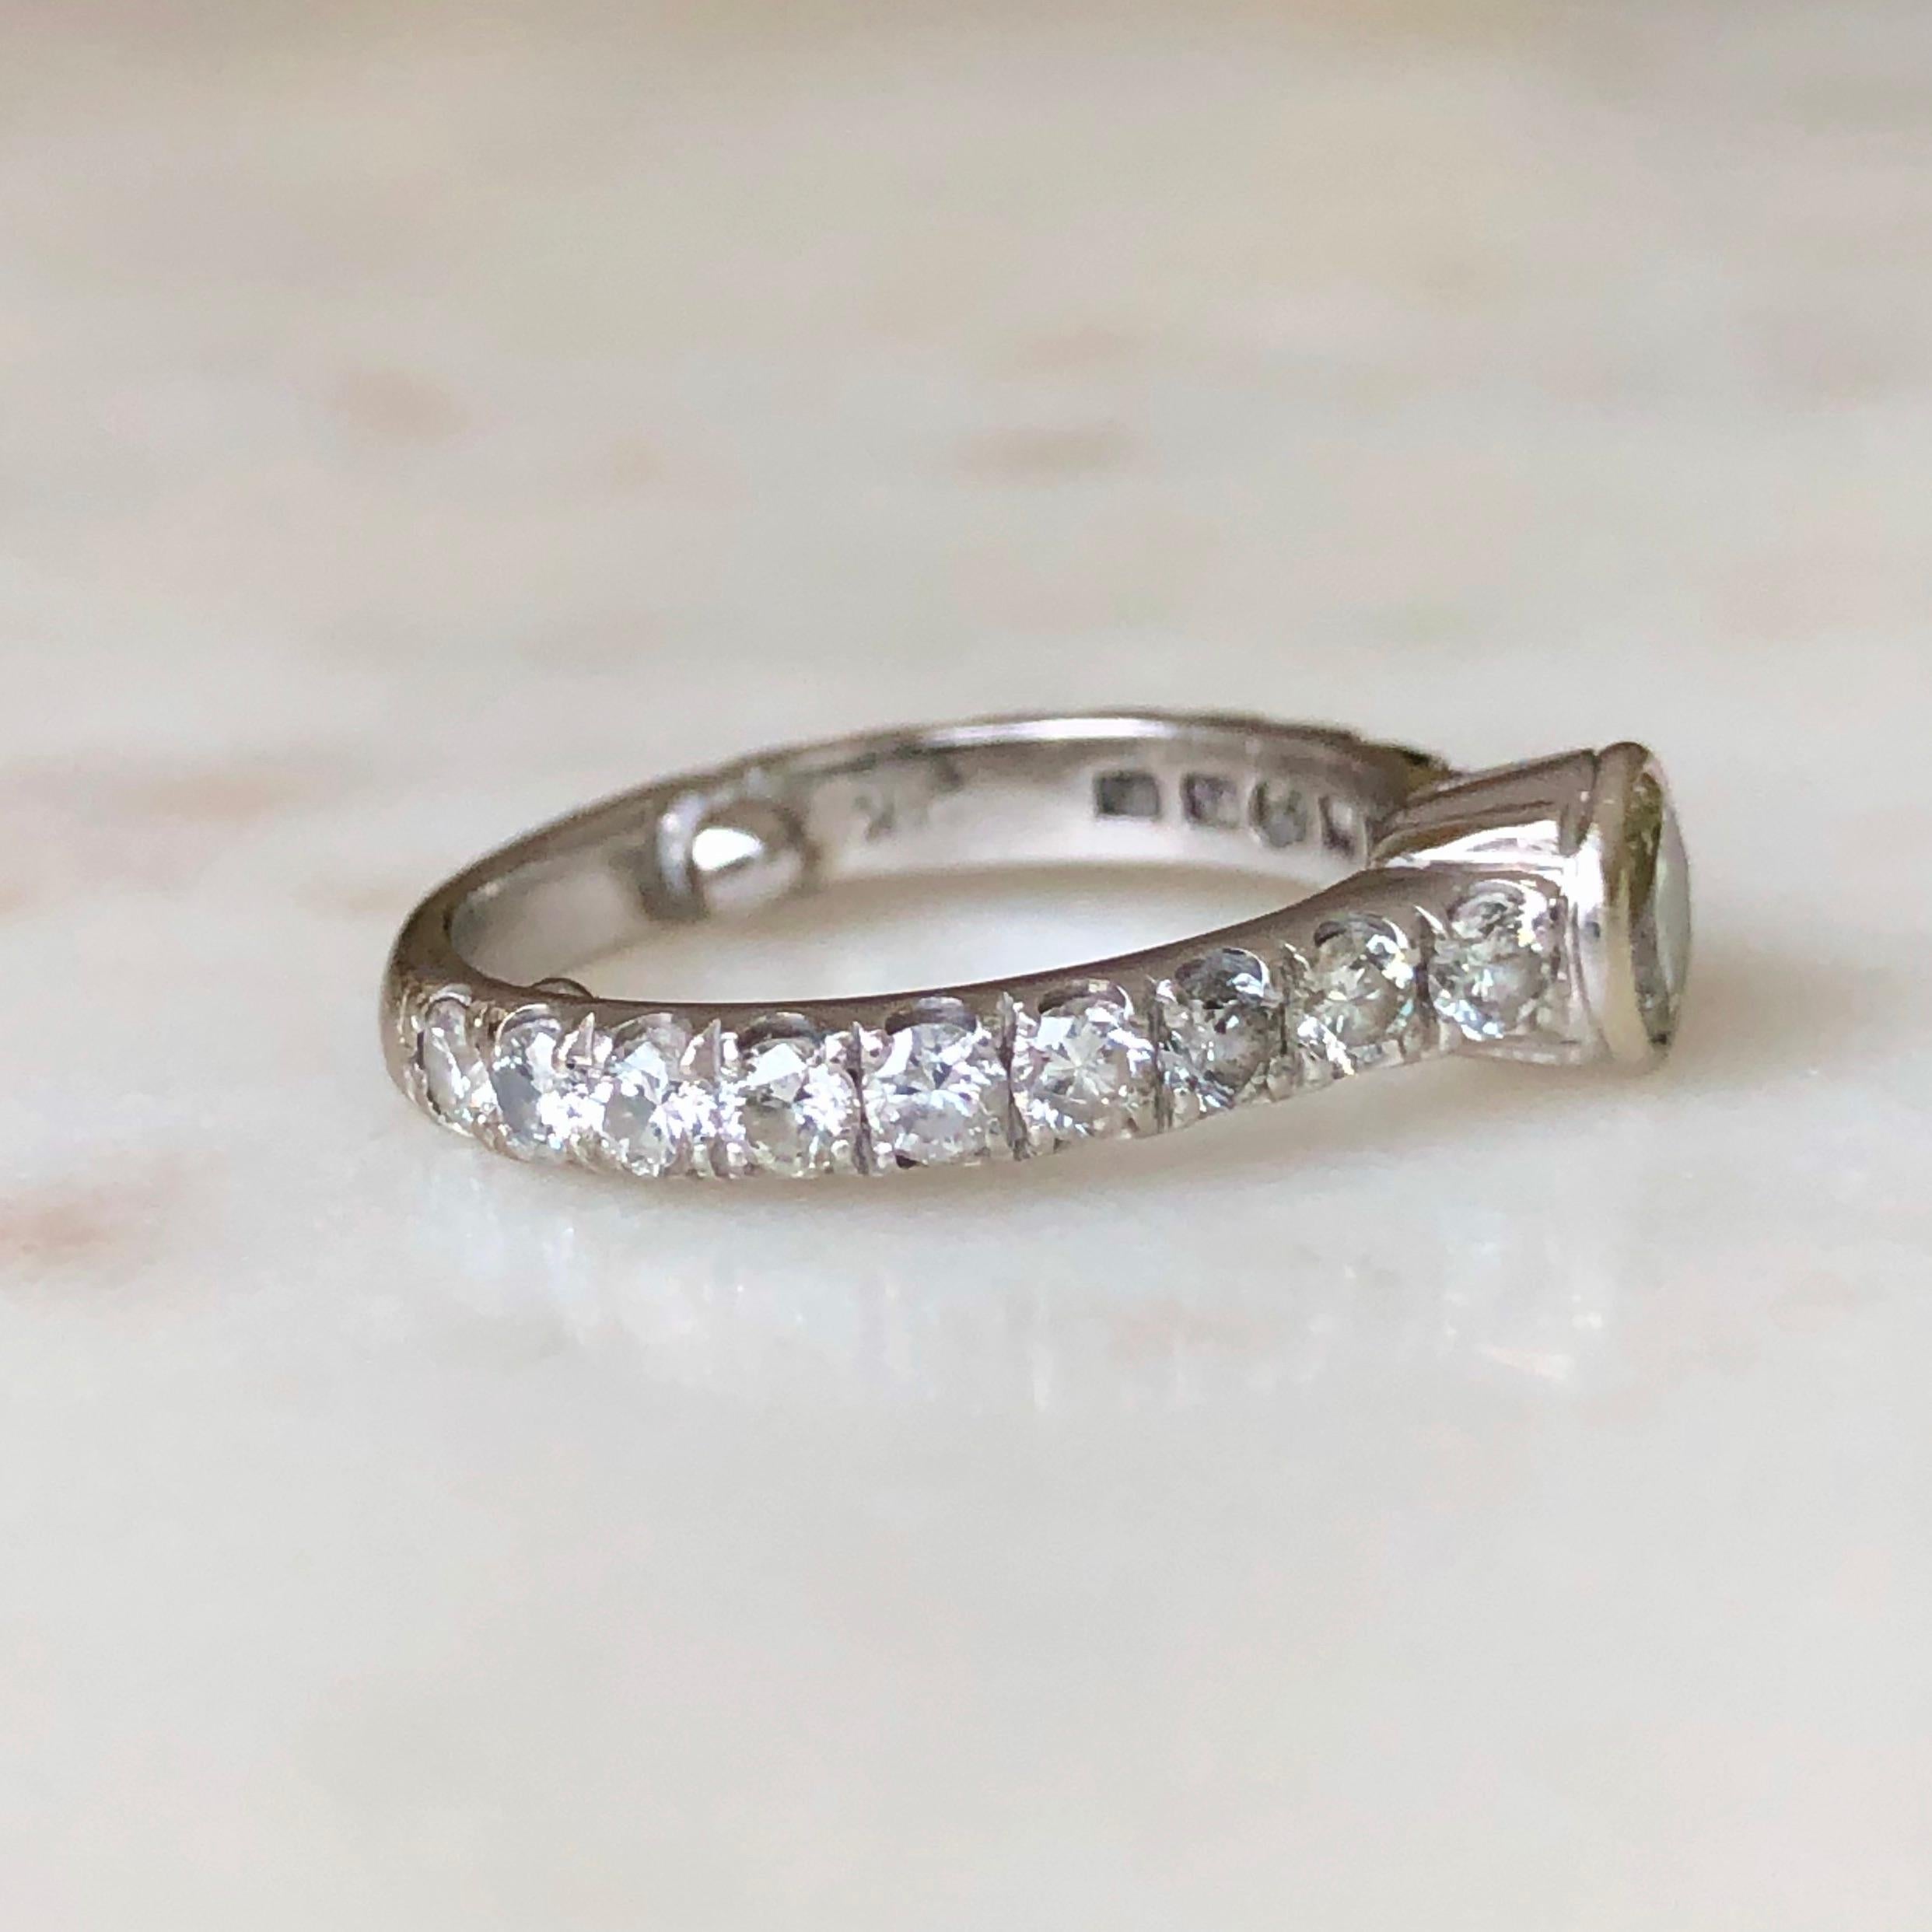 Engagement solitaire ring with diamond accents; excellent condition.
White gold  bezel set center round brilliant cut diamond 4.4mm 0.36 carat J-SI1. Set on the side of the band with eighteen (18) natural diamonds, round brilliant cut, set in shared